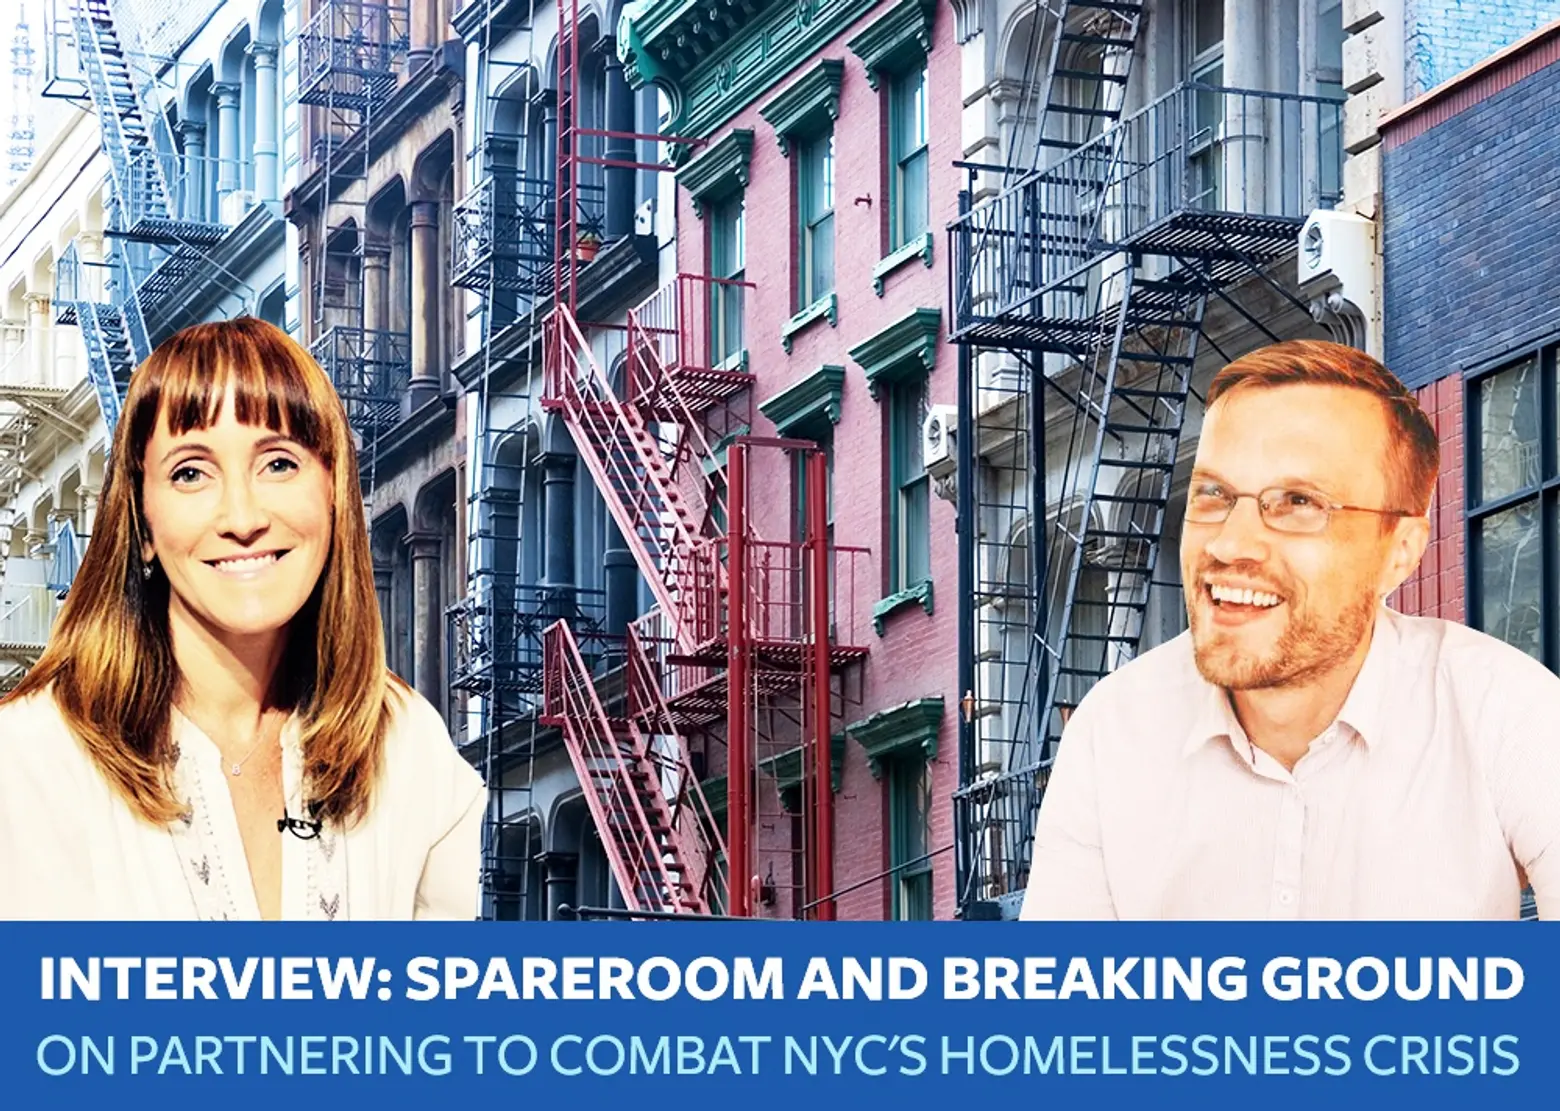 INTERVIEW: Why SpareRoom and Breaking Ground partnered to combat NYC’s homelessness crisis